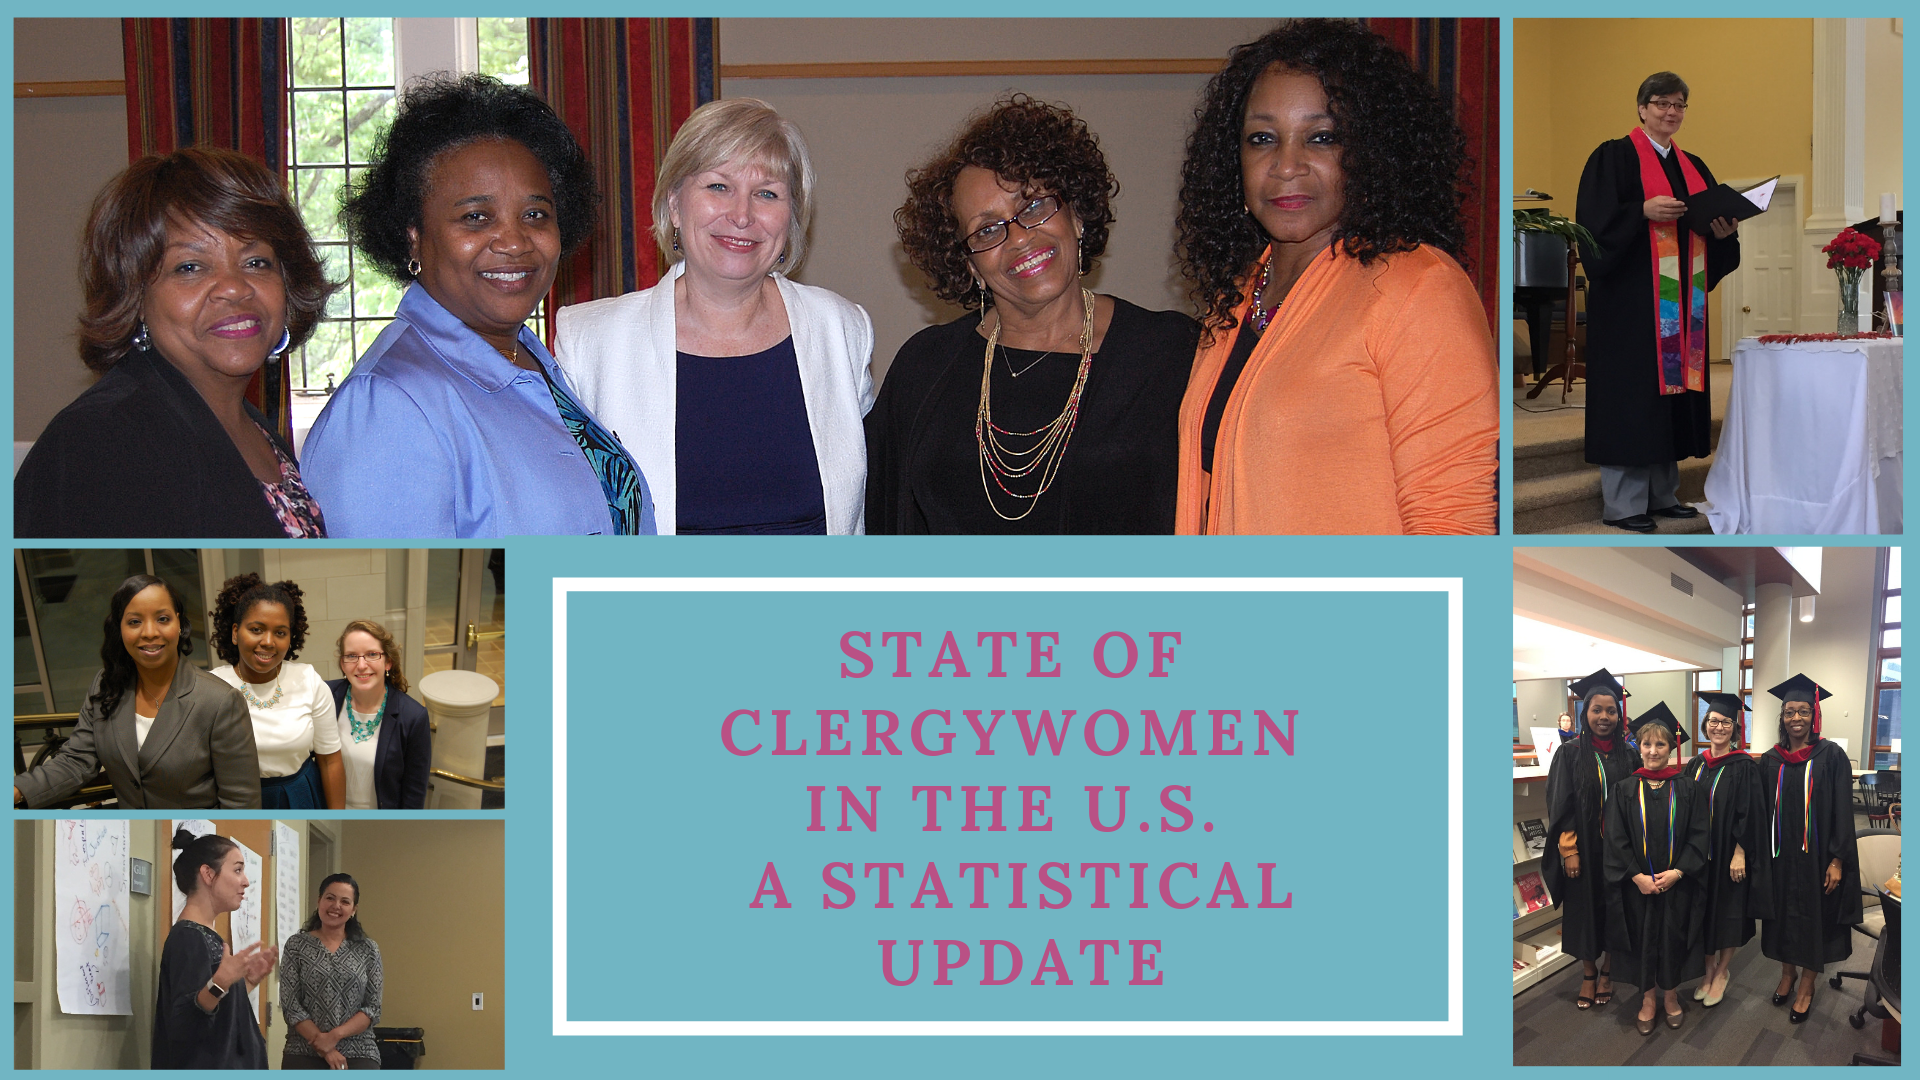 State of Clergywomen in the U.S. Report!